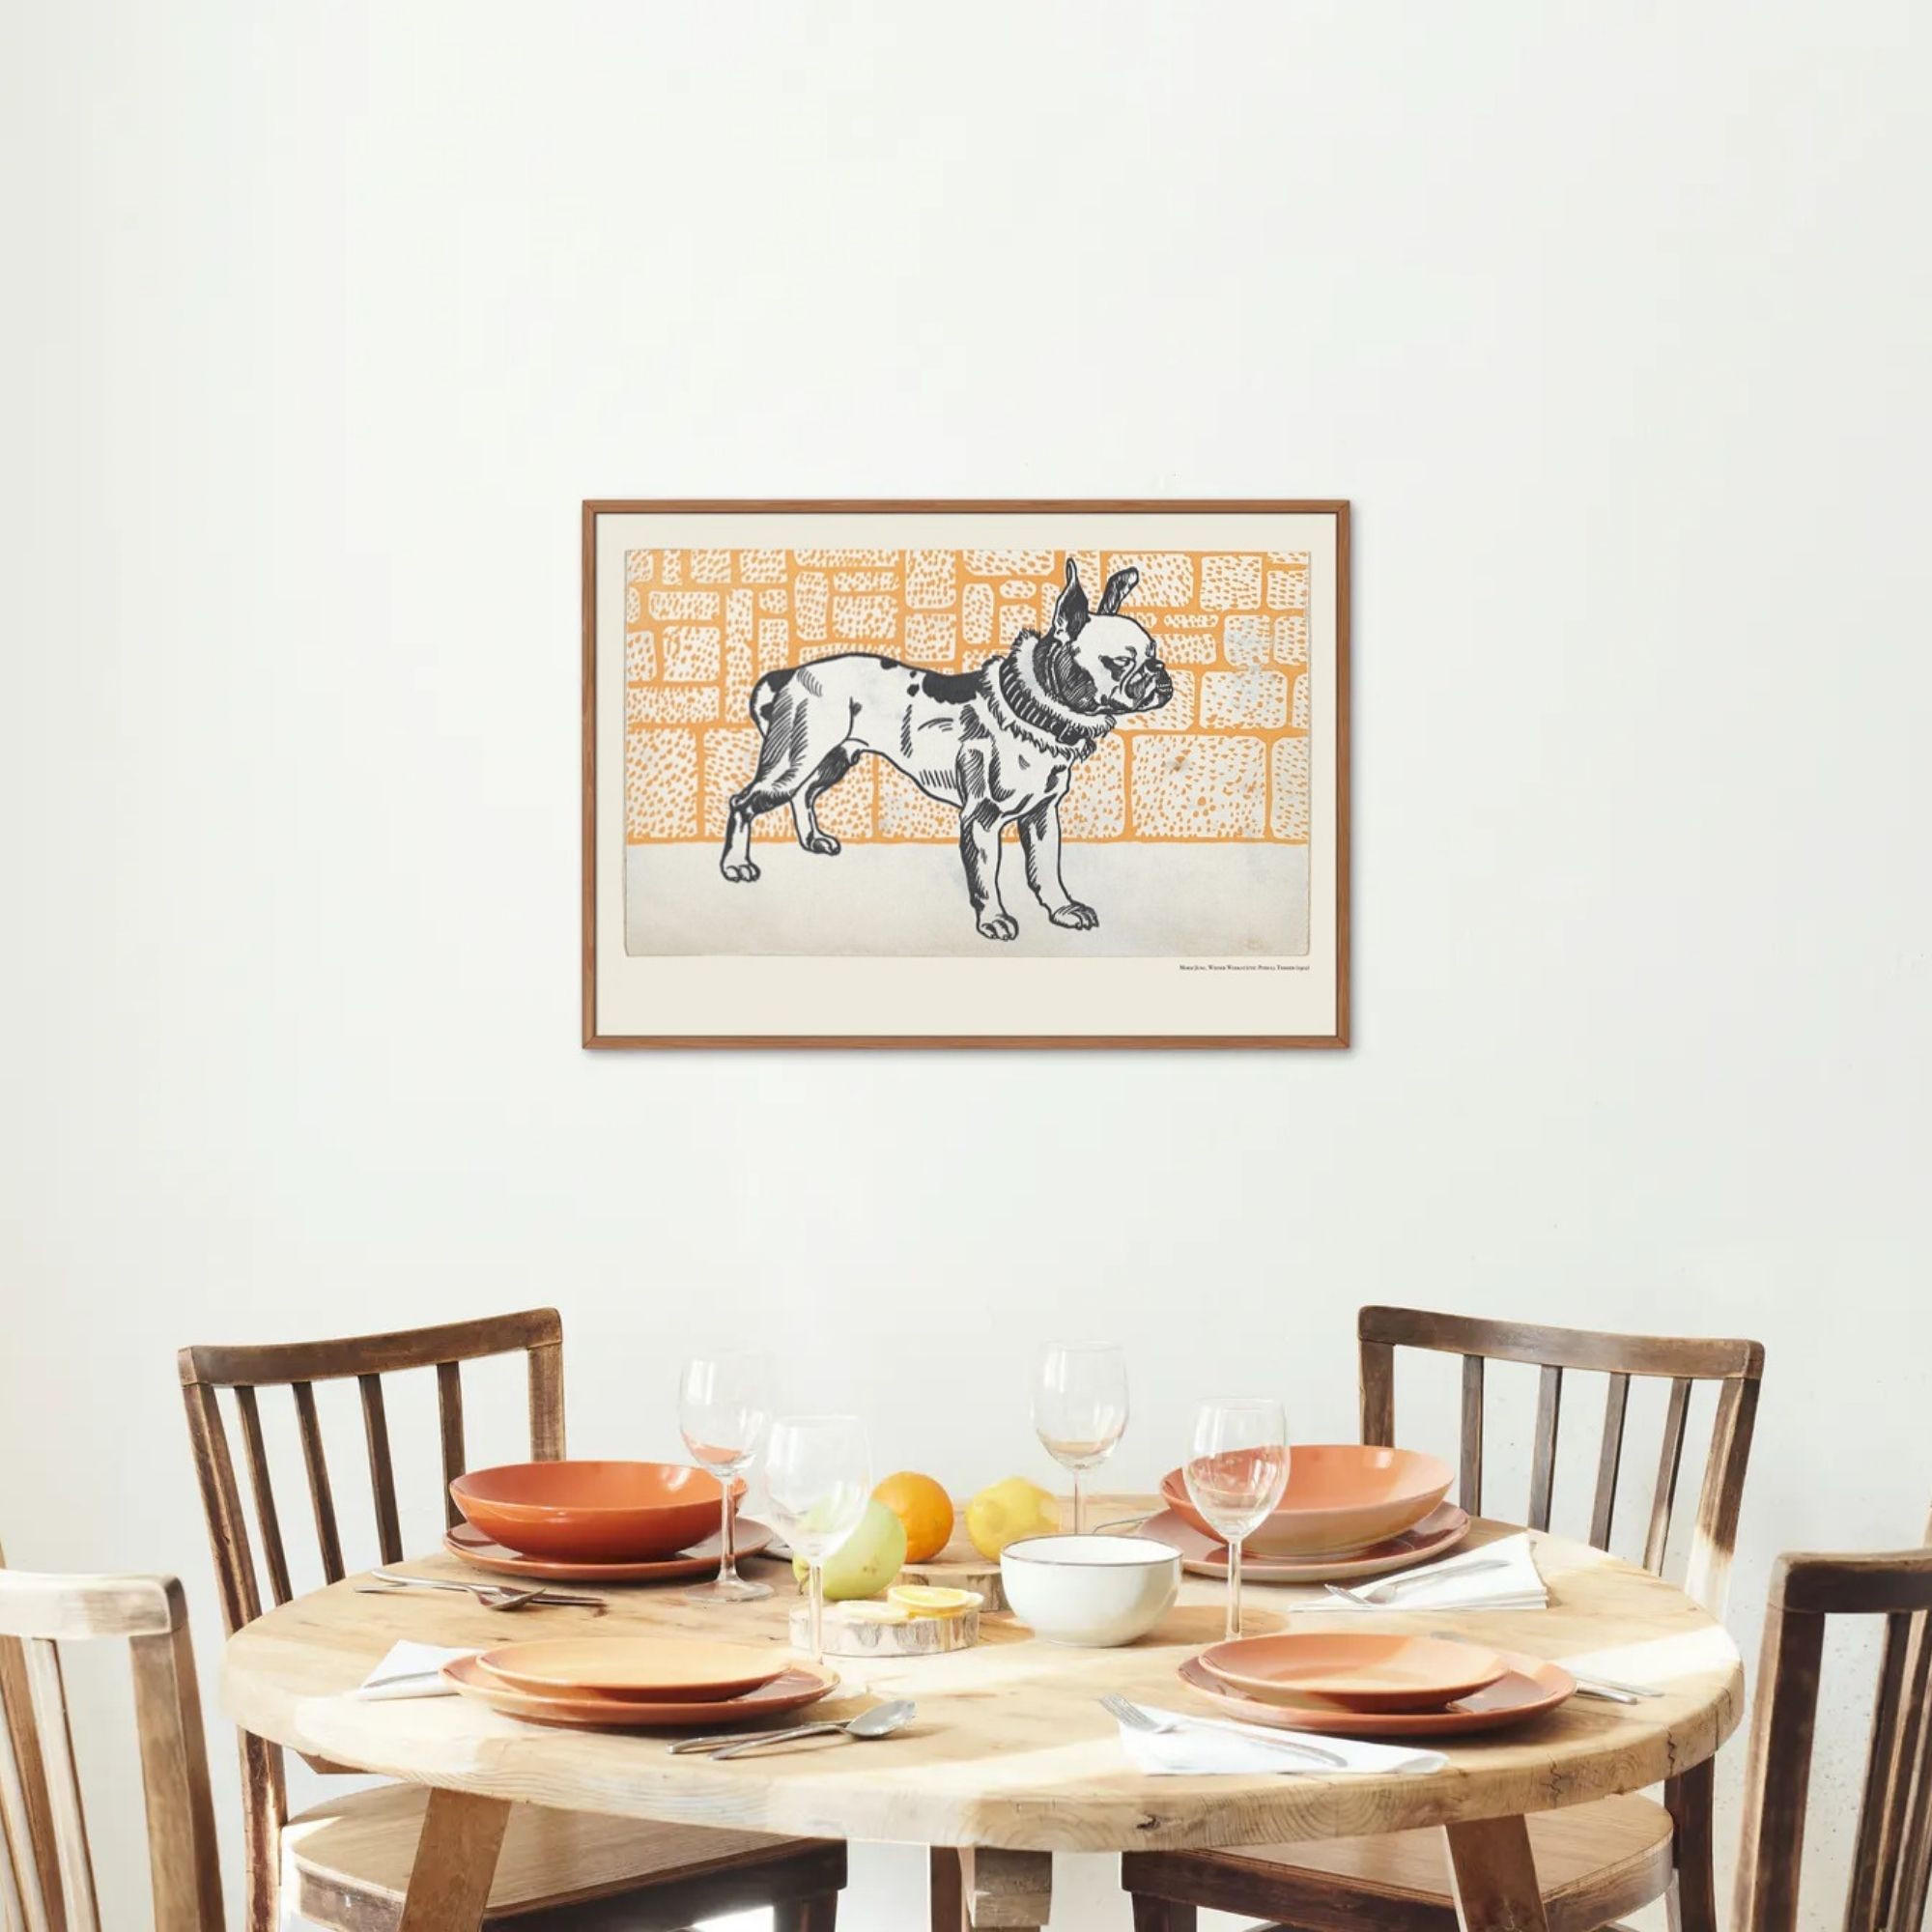 Woodcut print artwork by Moriz Jung featuring a detailed illustration of a brindle-patterned bulldog with perky ears, standing in profile against a backdrop of orange bricks with intricate textures.